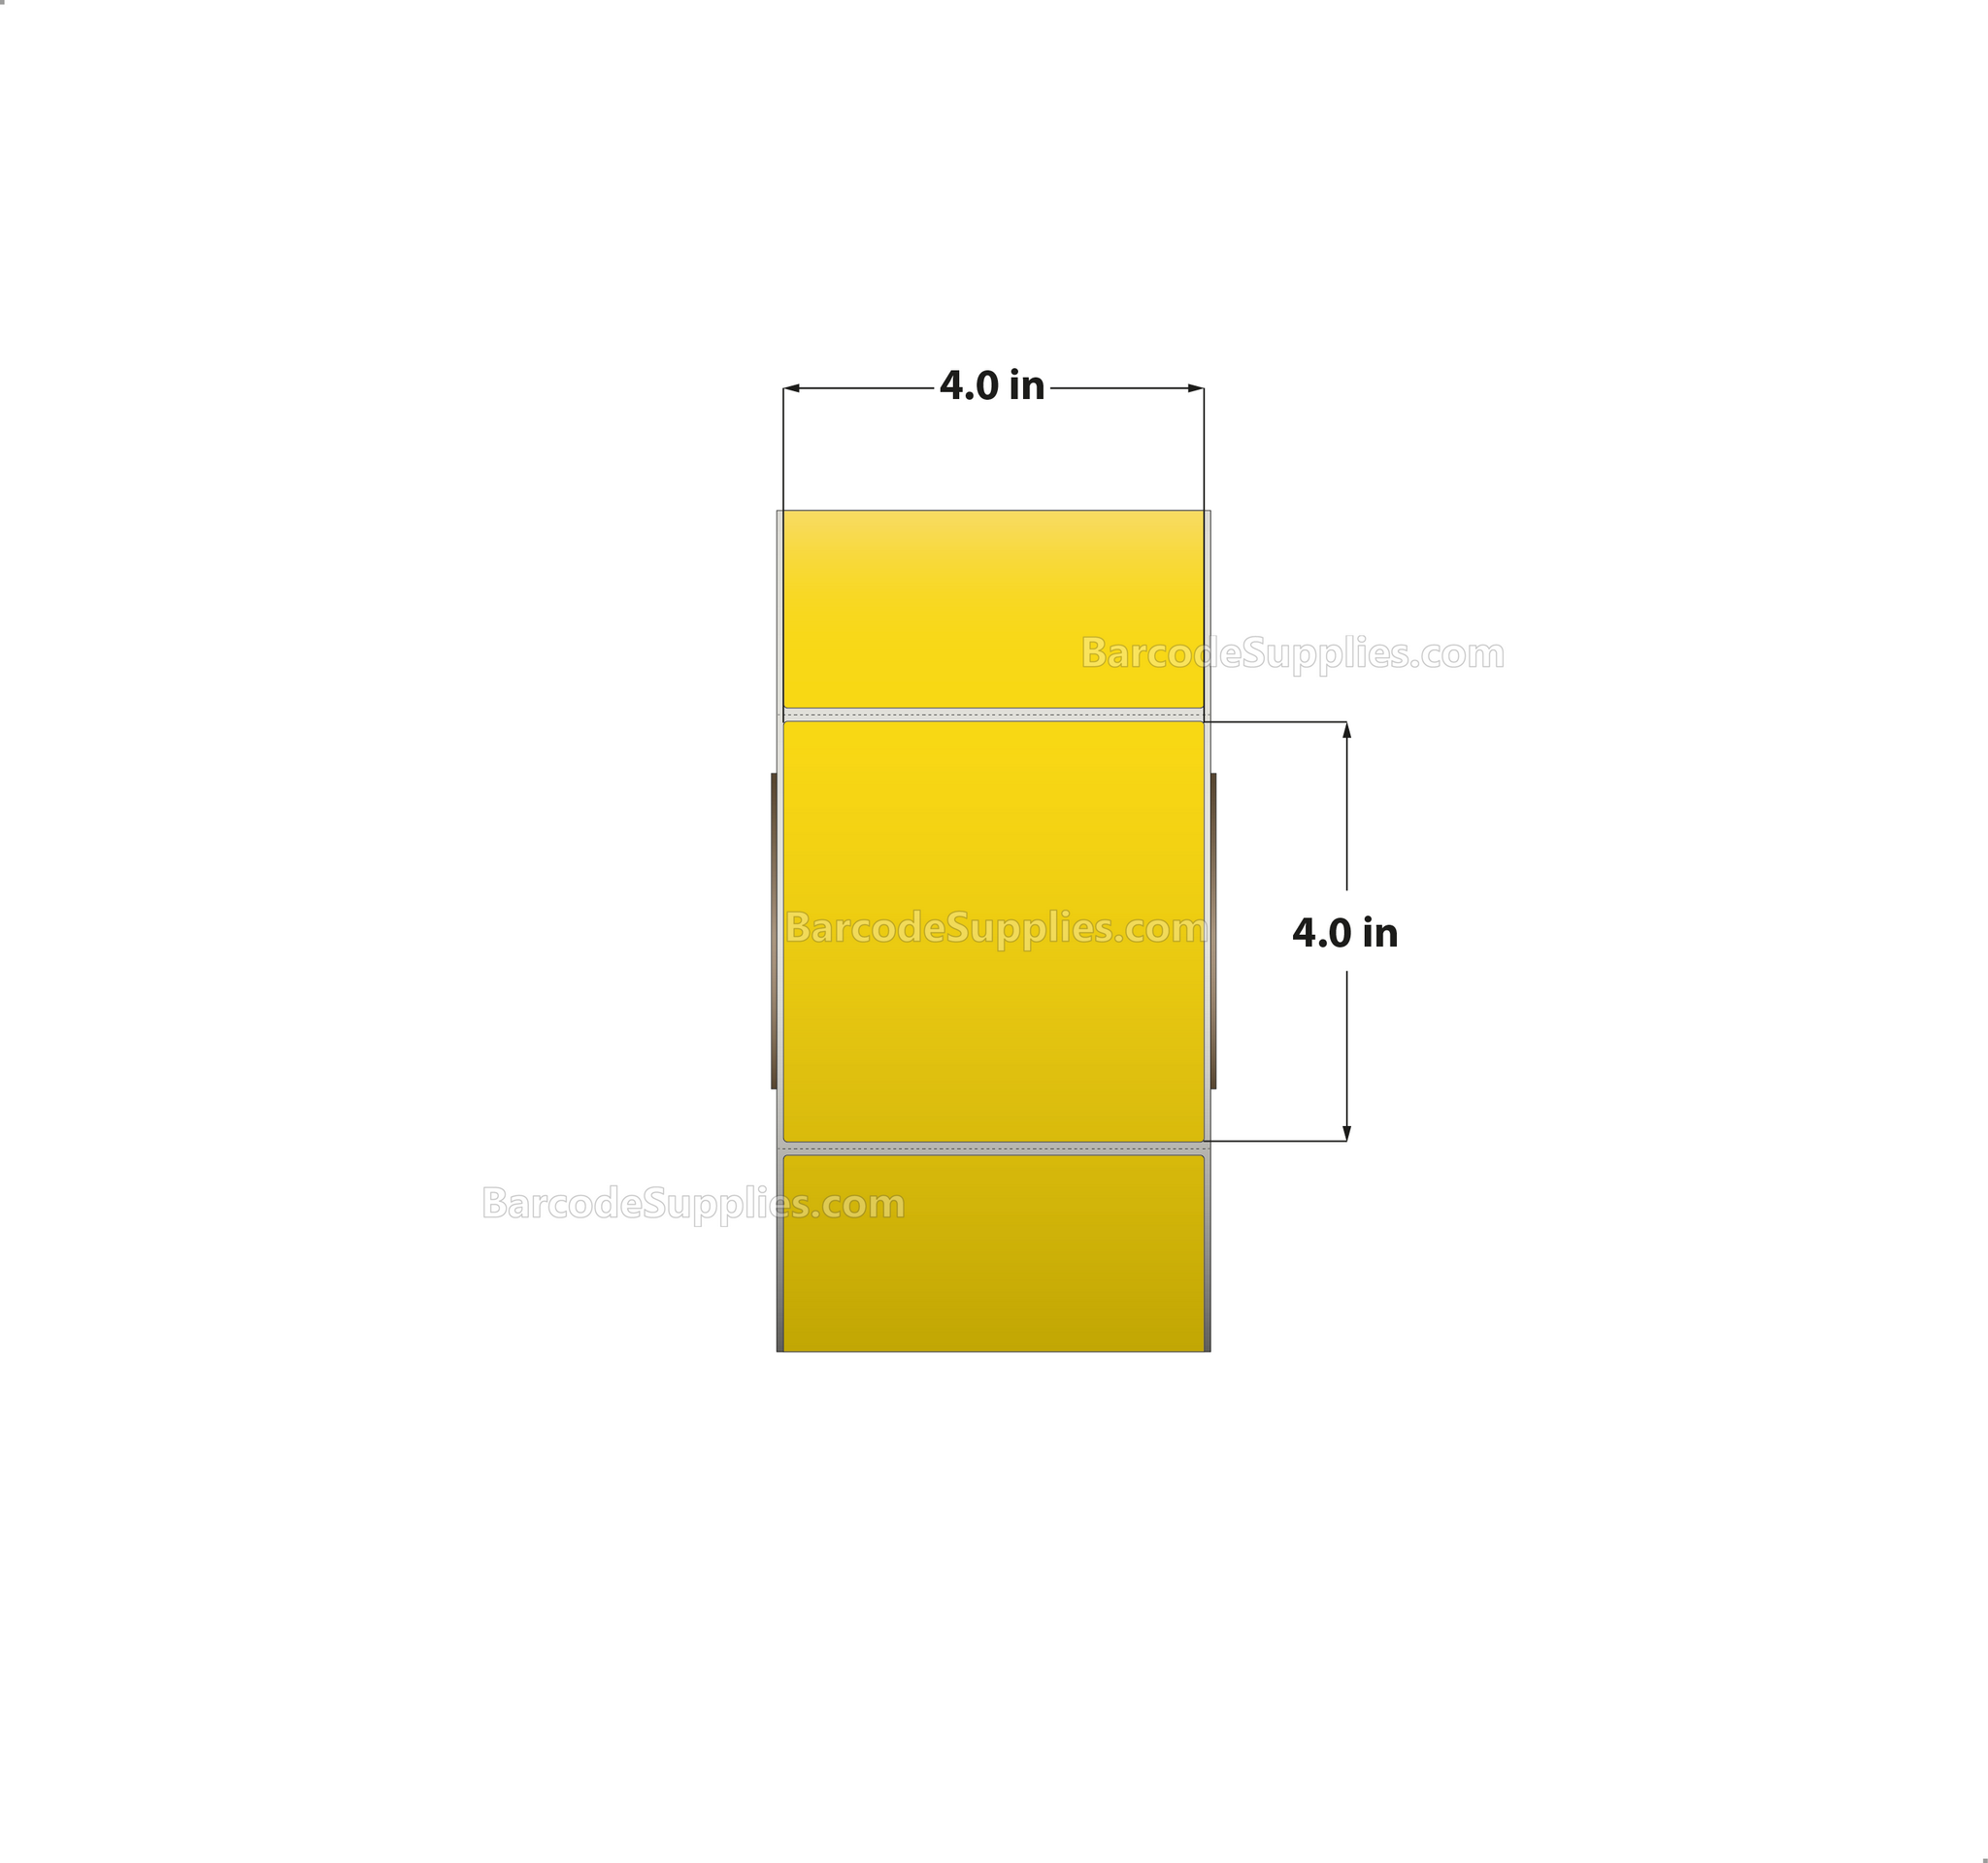 4 x 4 Thermal Transfer Pantone Yellow Labels With Permanent Adhesive - Perforated - 1500 Labels Per Roll - Carton Of 4 Rolls - 6000 Labels Total - MPN: RFC-4-4-1500-YL